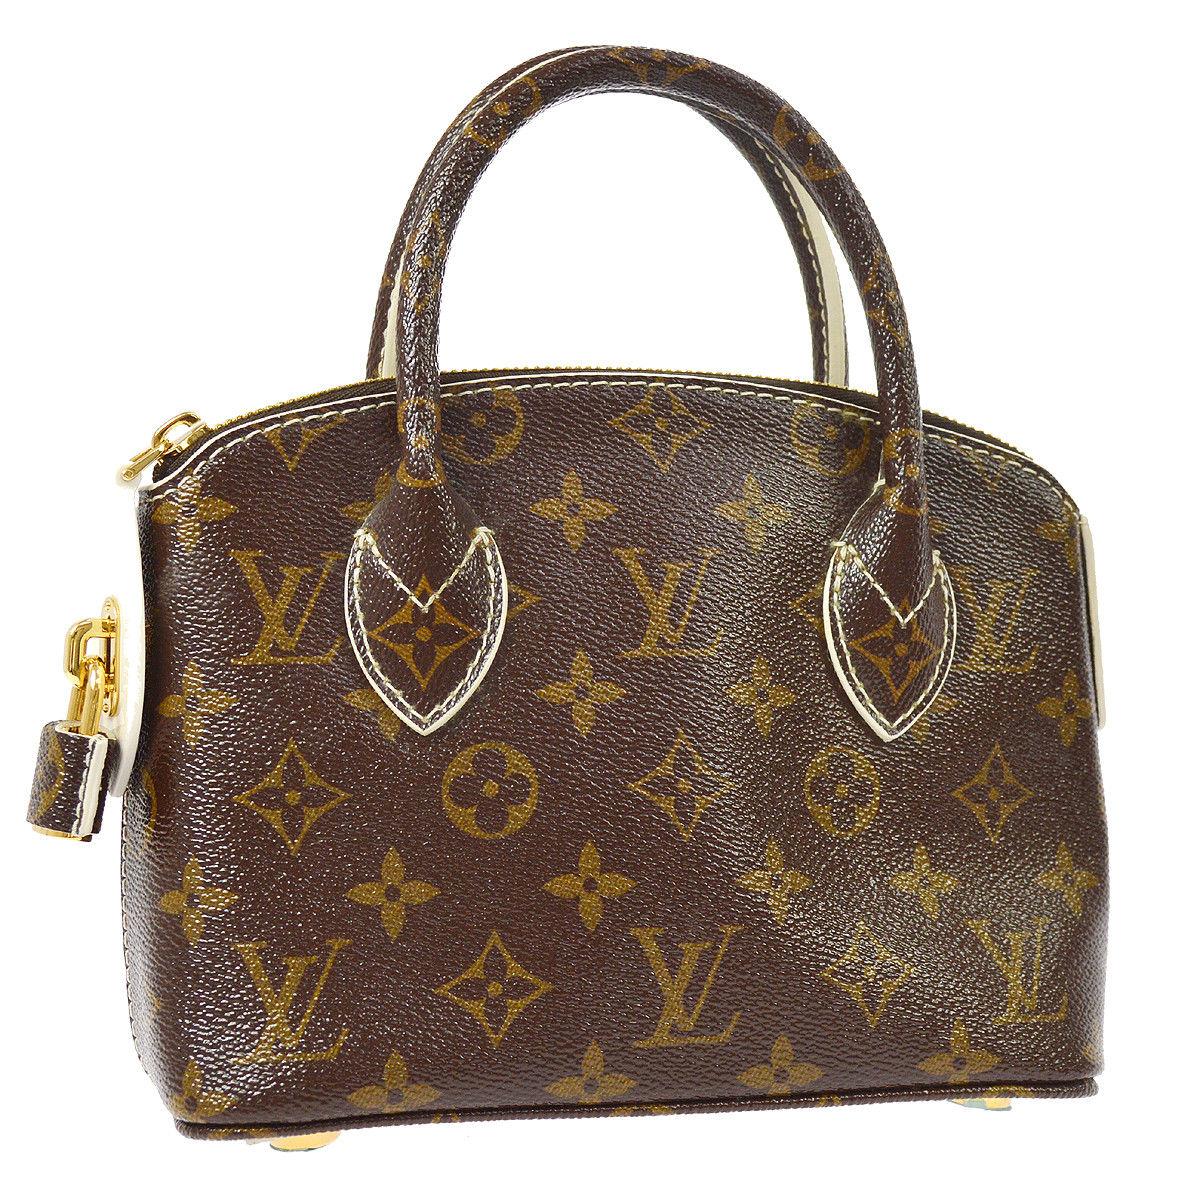 Louis Vuitton Monogram Canvas Evening Small Top Handle Satchel Bag

Monogram canvas
Leather
Gold tone hardware
Date code present
Made in France
Handle drop 3